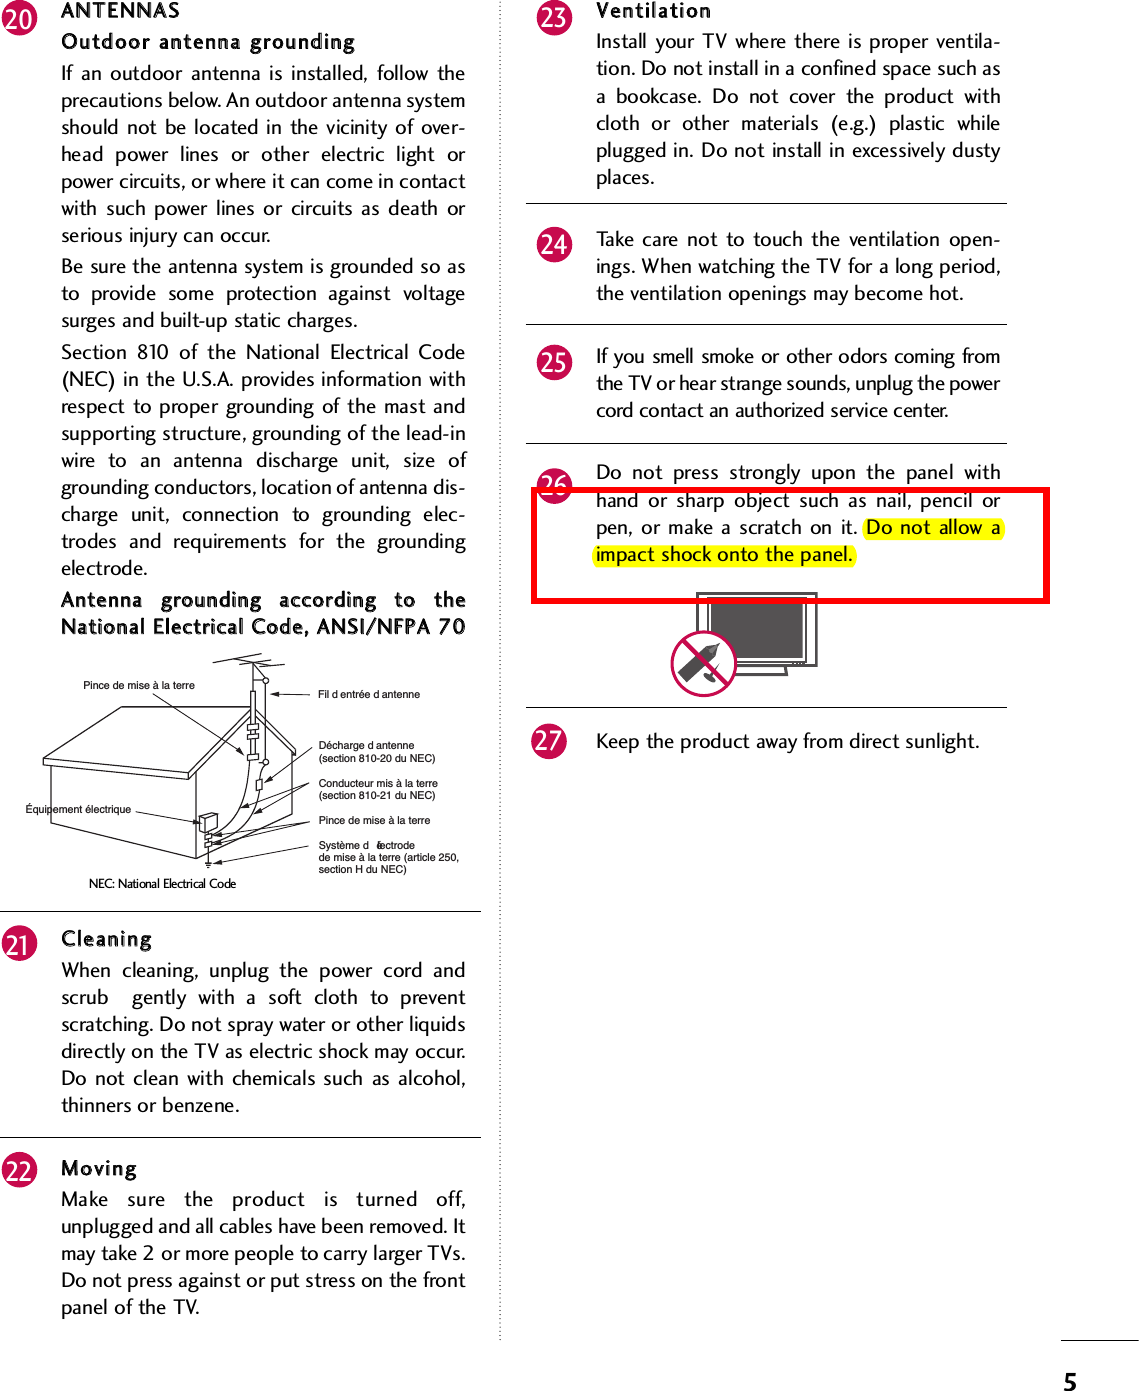 5AANNTTEENNNNAASSOOuuttddoooorr  aanntteennnnaa  ggrroouunnddiinnggIf an outdoor antenna is installed, follow theprecautions below. An outdoor antenna systemshould not be located in the vicinity of over-head power lines or other electric light orpower circuits, or where it can come in contactwith such power lines or circuits as death orserious injury can occur.Be sure the antenna system is grounded so asto provide some protection against voltagesurges and built-up static charges. Section 810 of the National Electrical Code(NEC) in the U.S.A. provides information withrespect to proper grounding of the mast andsupporting structure, grounding of the lead-inwire to an antenna discharge unit, size ofgrounding conductors, location of antenna dis-charge unit, connection to grounding elec-trodes and requirements for the groundingelectrode. AAnntteennnnaa  ggrroouunnddiinngg  aaccccoorrddiinngg  ttoo  tthheeNNaattiioonnaall  EElleeccttrriiccaall  CCooddee,,  AANNSSII//NNFFPPAA  7700CClleeaanniinnggWhen cleaning, unplug the power cord andscrub  gently with a soft cloth to preventscratching. Do not spray water or other liquidsdirectly on the TV as electric shock may occur.Do not clean with chemicals such as alcohol,thinners or benzene.  MMoovviinnggMake sure the product is turned off,unplugged and all cables have been removed. Itmay take 2 or more people to carry larger TVs.Do not press against or put stress on the frontpanel of the TV. VVeennttiillaattiioonnInstall your TV where there is proper ventila-tion. Do not install in a confined space such asa bookcase. Do not cover the product withcloth or other materials (e.g.) plastic whileplugged in. Do not install in excessively dustyplaces. Take care not to touch the ventilation open-ings. When watching the TV for a long period,the ventilation openings may become hot. If you smell smoke or other odors coming fromthe TV or hear strange sounds, unplug the powercord contact an authorized service center.Do not press strongly upon the panel withhand or sharp object such as nail, pencil orpen, or make a scratch on it. Do not allow aimpact shock onto the panel.Keep the product away from direct sunlight.20 232425262122Fil d entrée d antenneDécharge d antenne(section 810-20 du NEC)Conducteur mis à la terre(section 810-21 du NEC)Pince de mise à la terreSystème d électrodede mise à la terre (article 250,section H du NEC)Pince de mise à la terreÉquipement électriqueNEC: National Electrical Code27